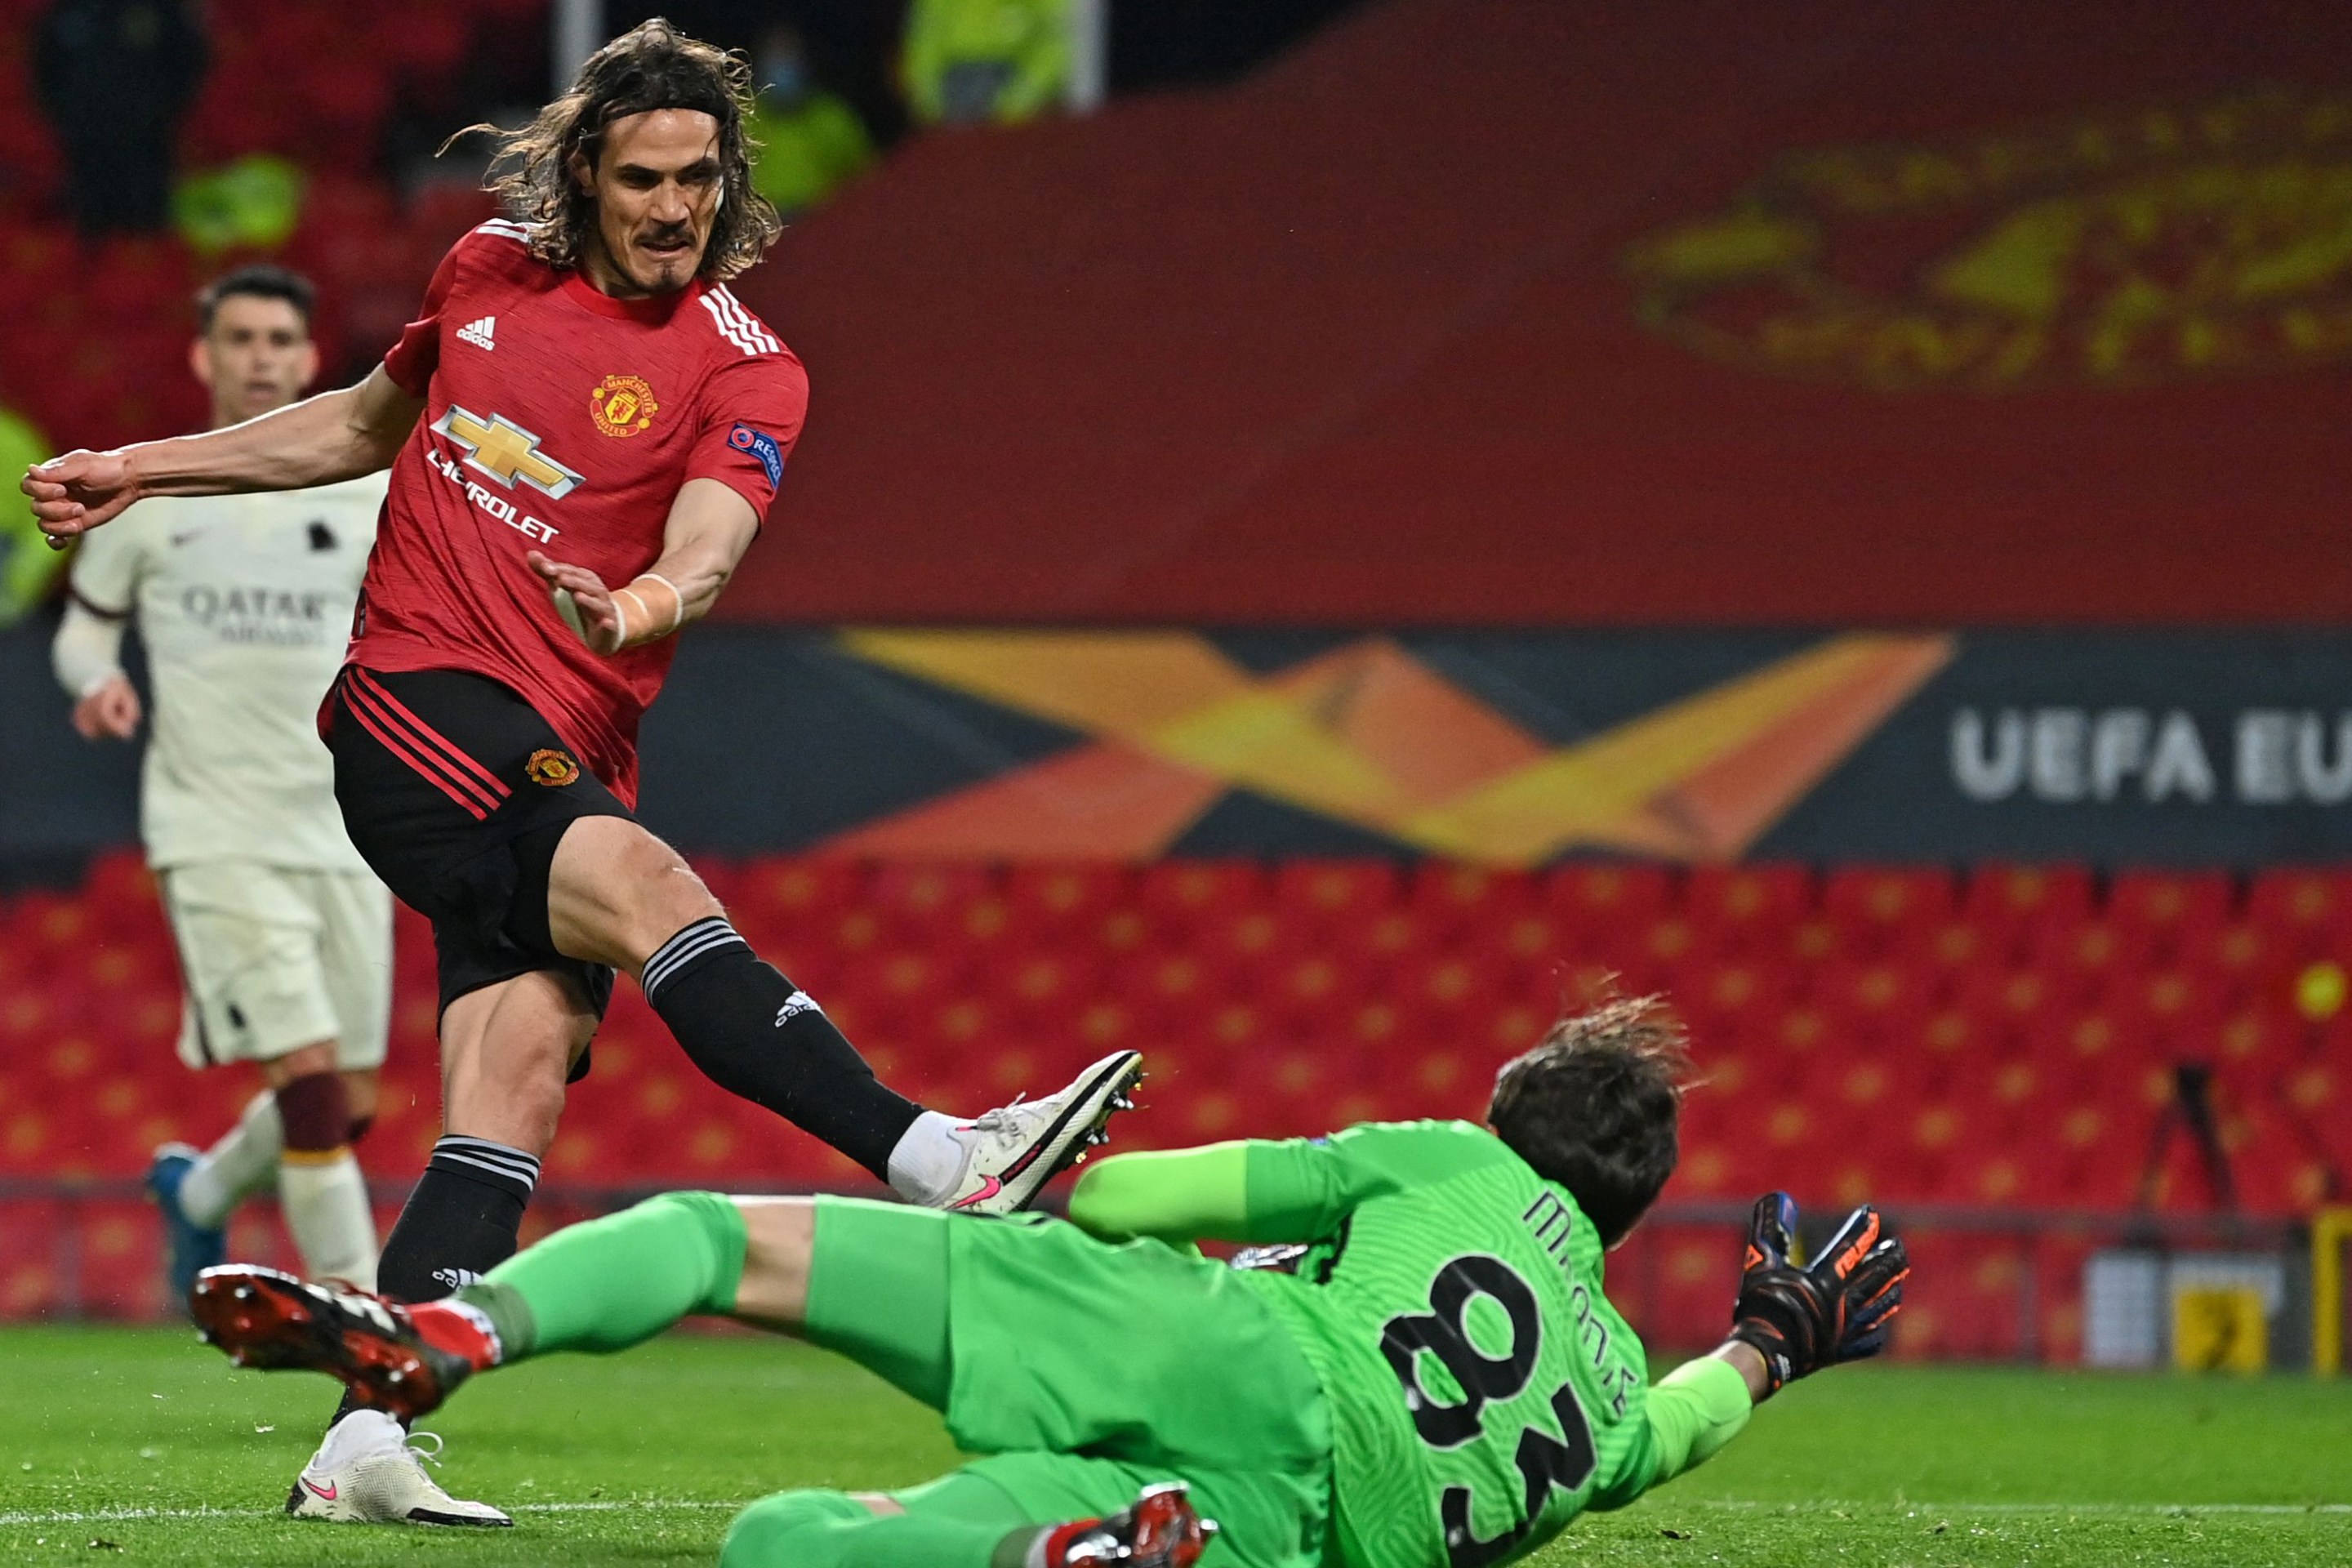 Manchester United's Uruguayan striker Edinson Cavani (L) shoots past Roma's Italian goalkeeper Antonio Mirante to score their third goal during the UEFA Europa League semi-final, first leg football match between Manchester United and Roma at Old Trafford stadium in Manchester, north west England, on April 29, 2021.